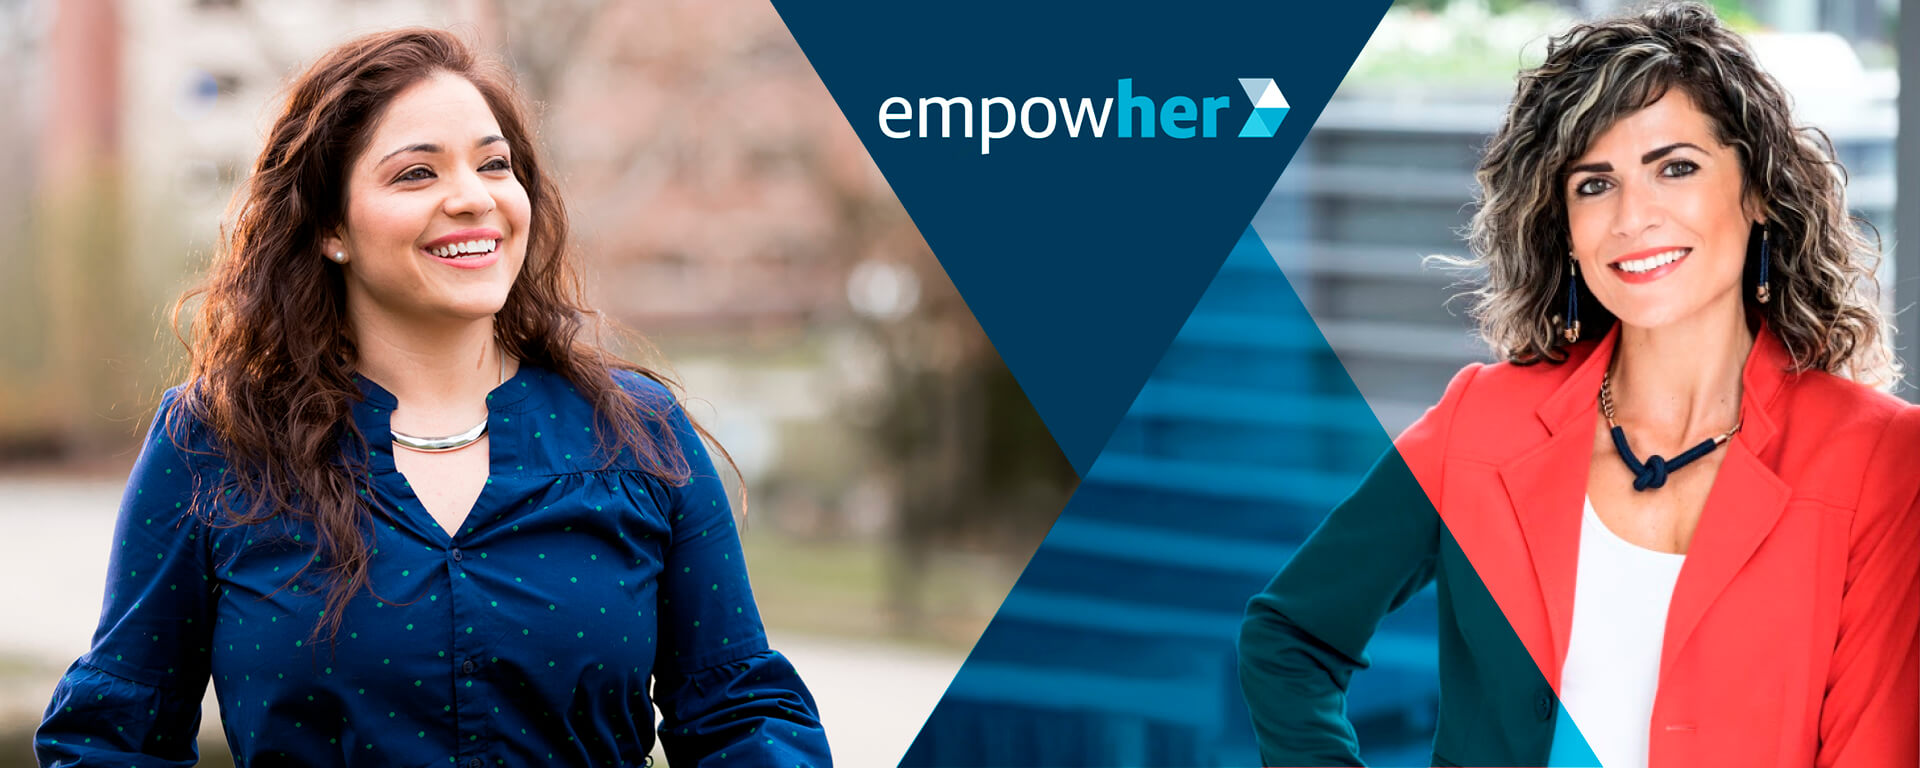 Two pictures of Capital One associates part of the EmpowerHER BRG at Capital One, with a blue triangular design overlay, and the EmpowerHER logo